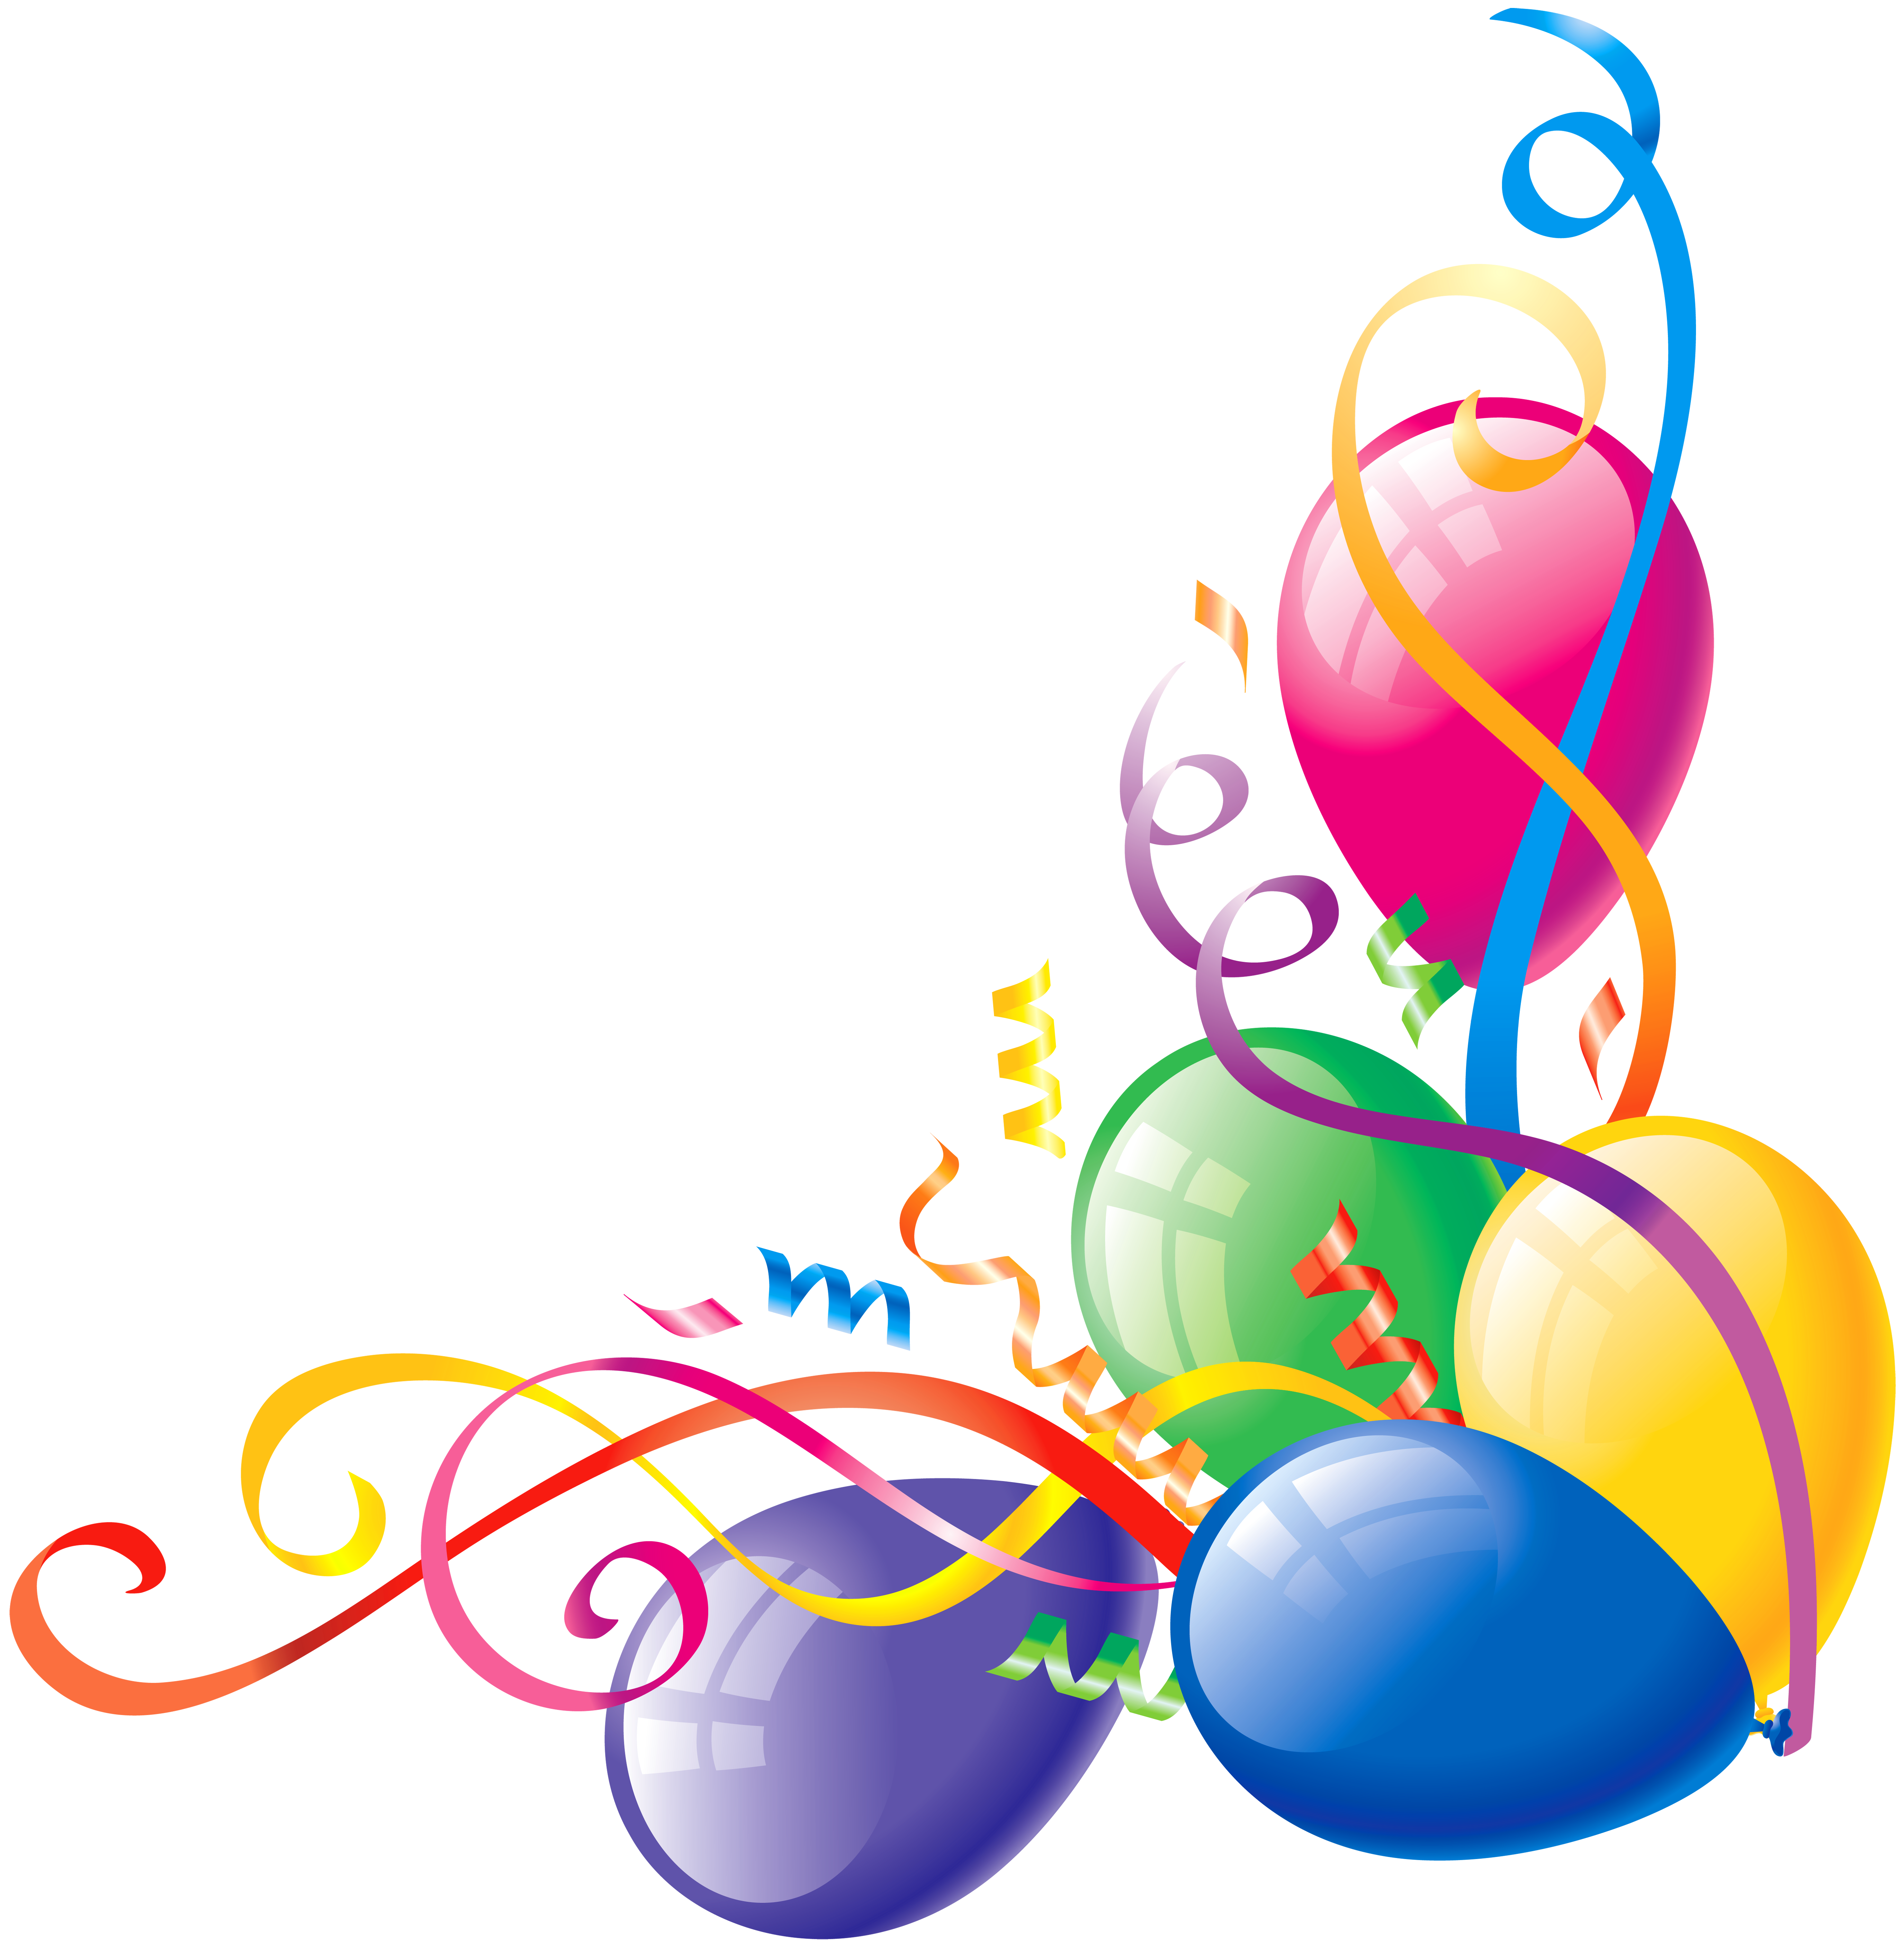 Balloon Clipart Png | Clipart library - Free Clipart Images